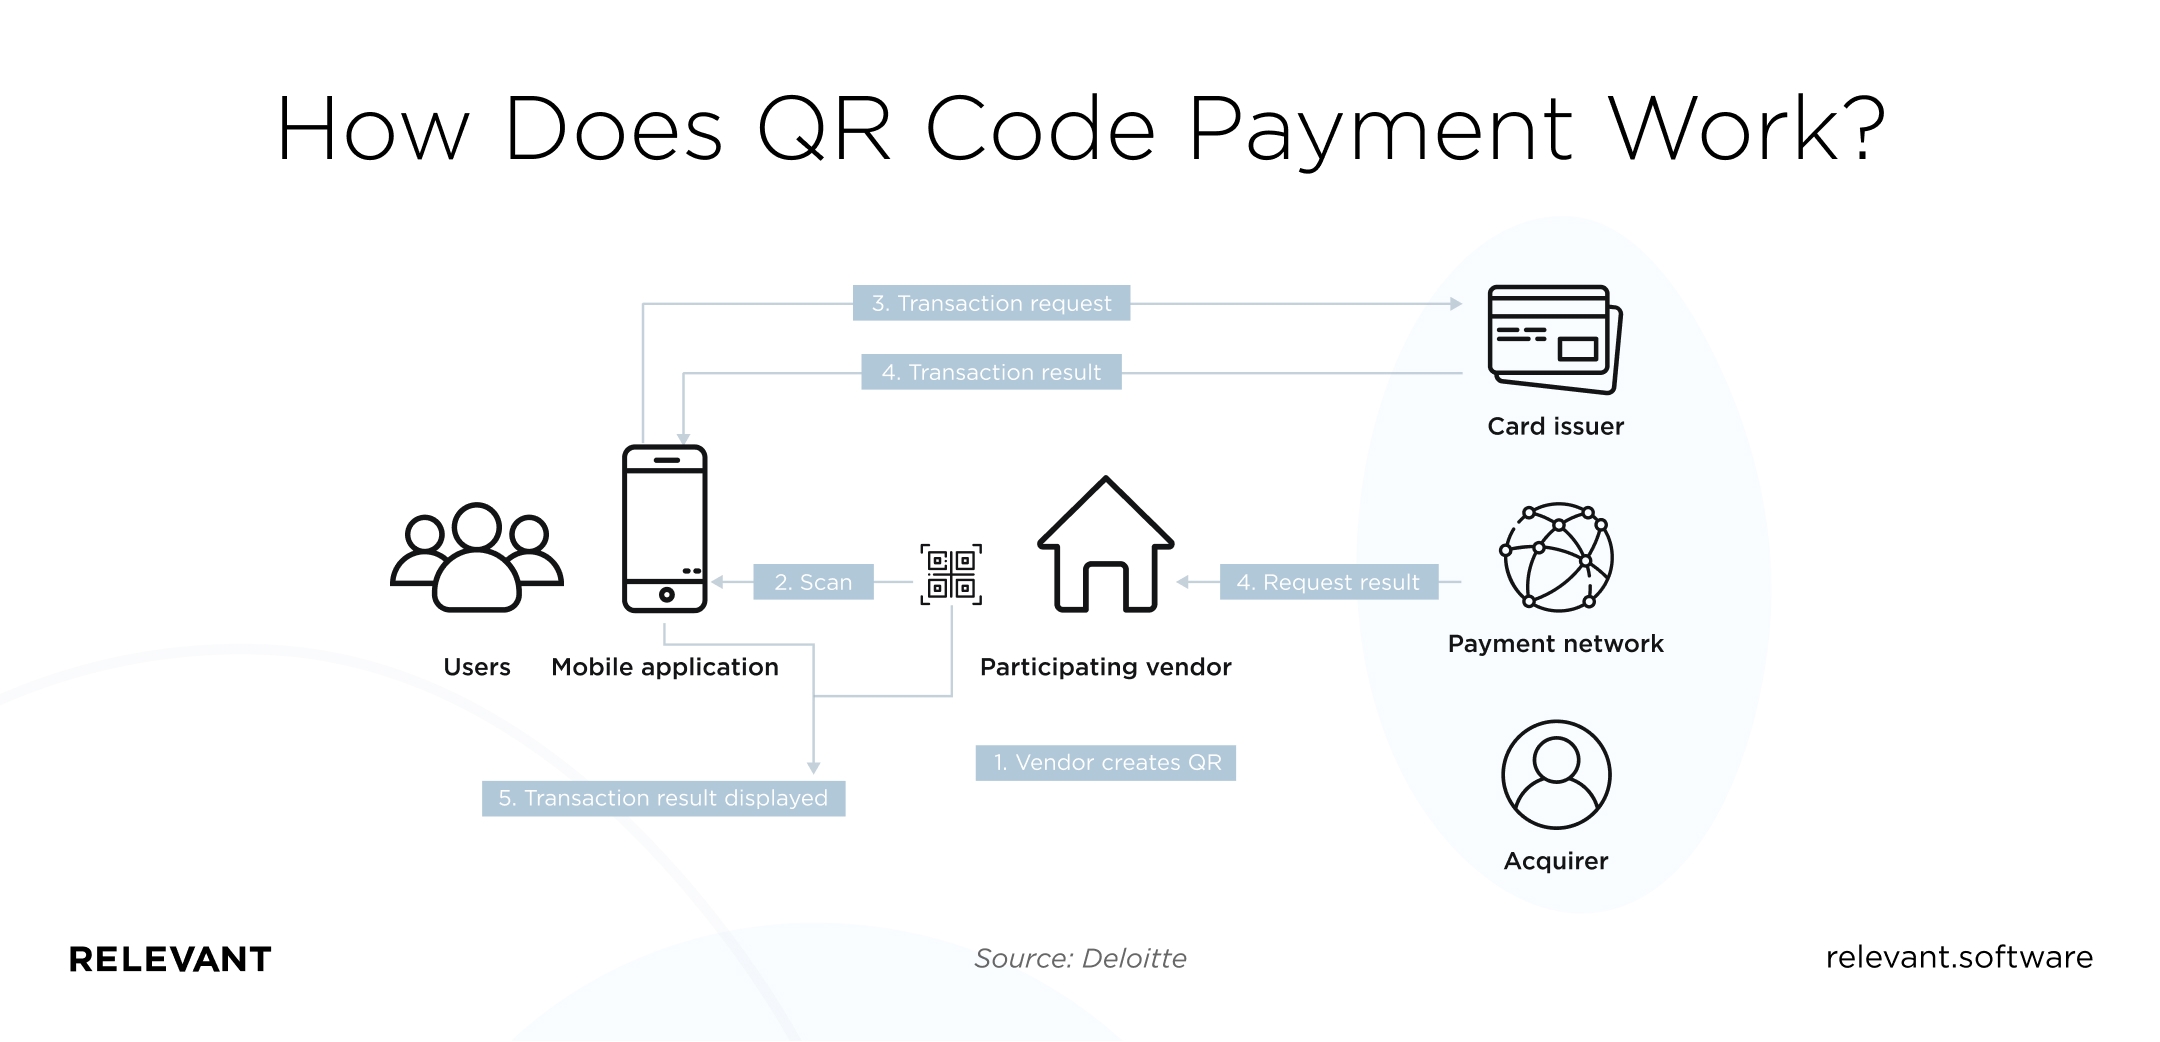 how does QR codes for payment work?